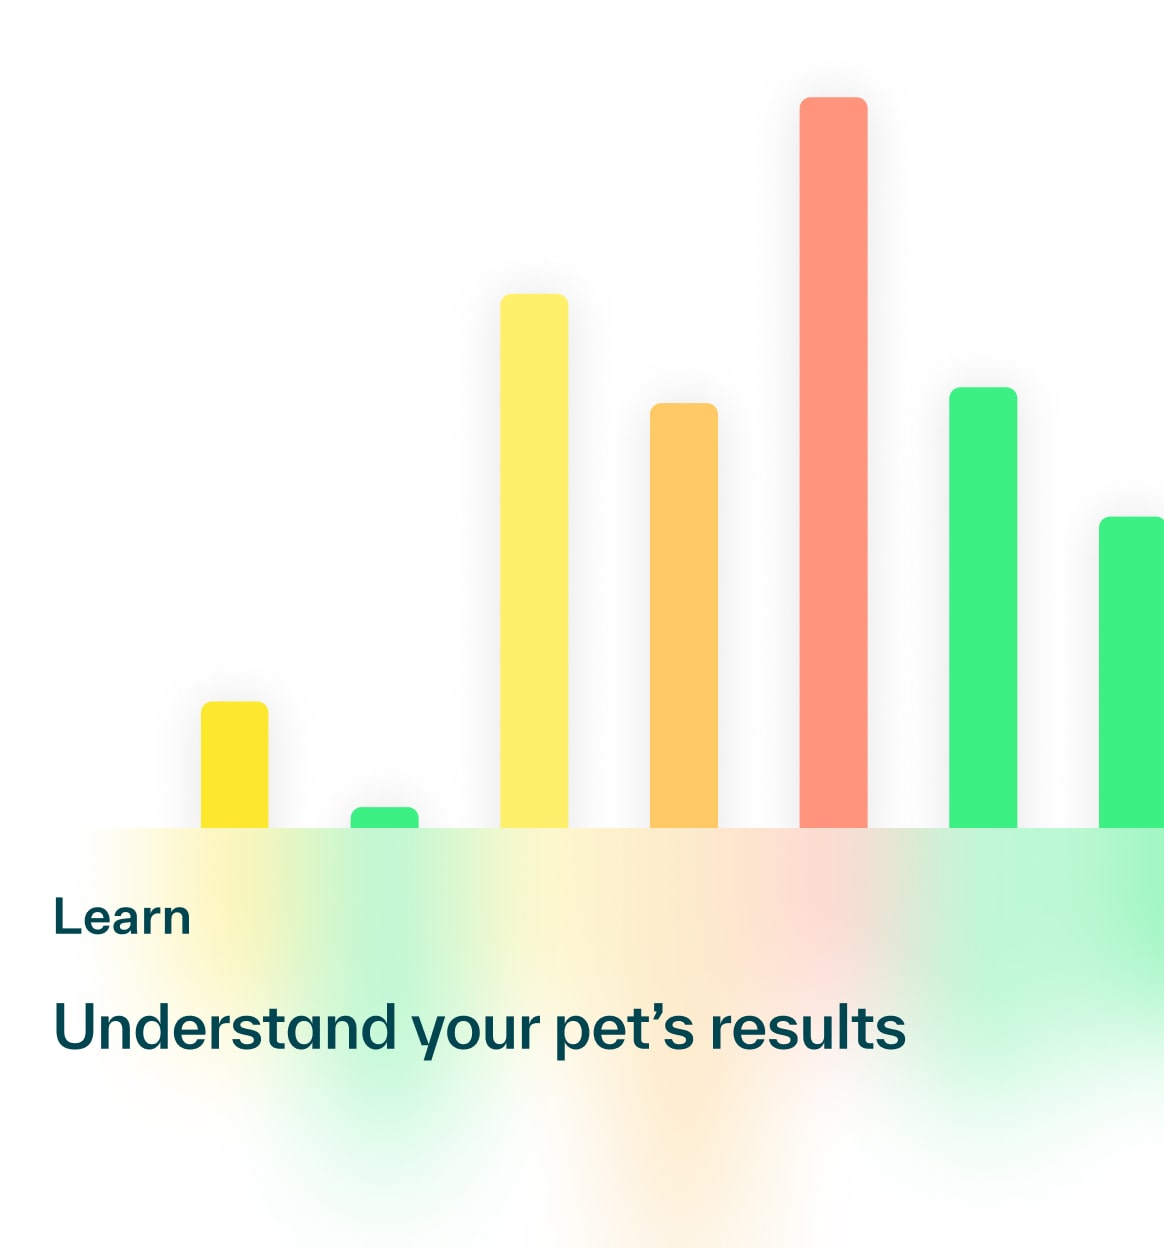 Understand your pet's results